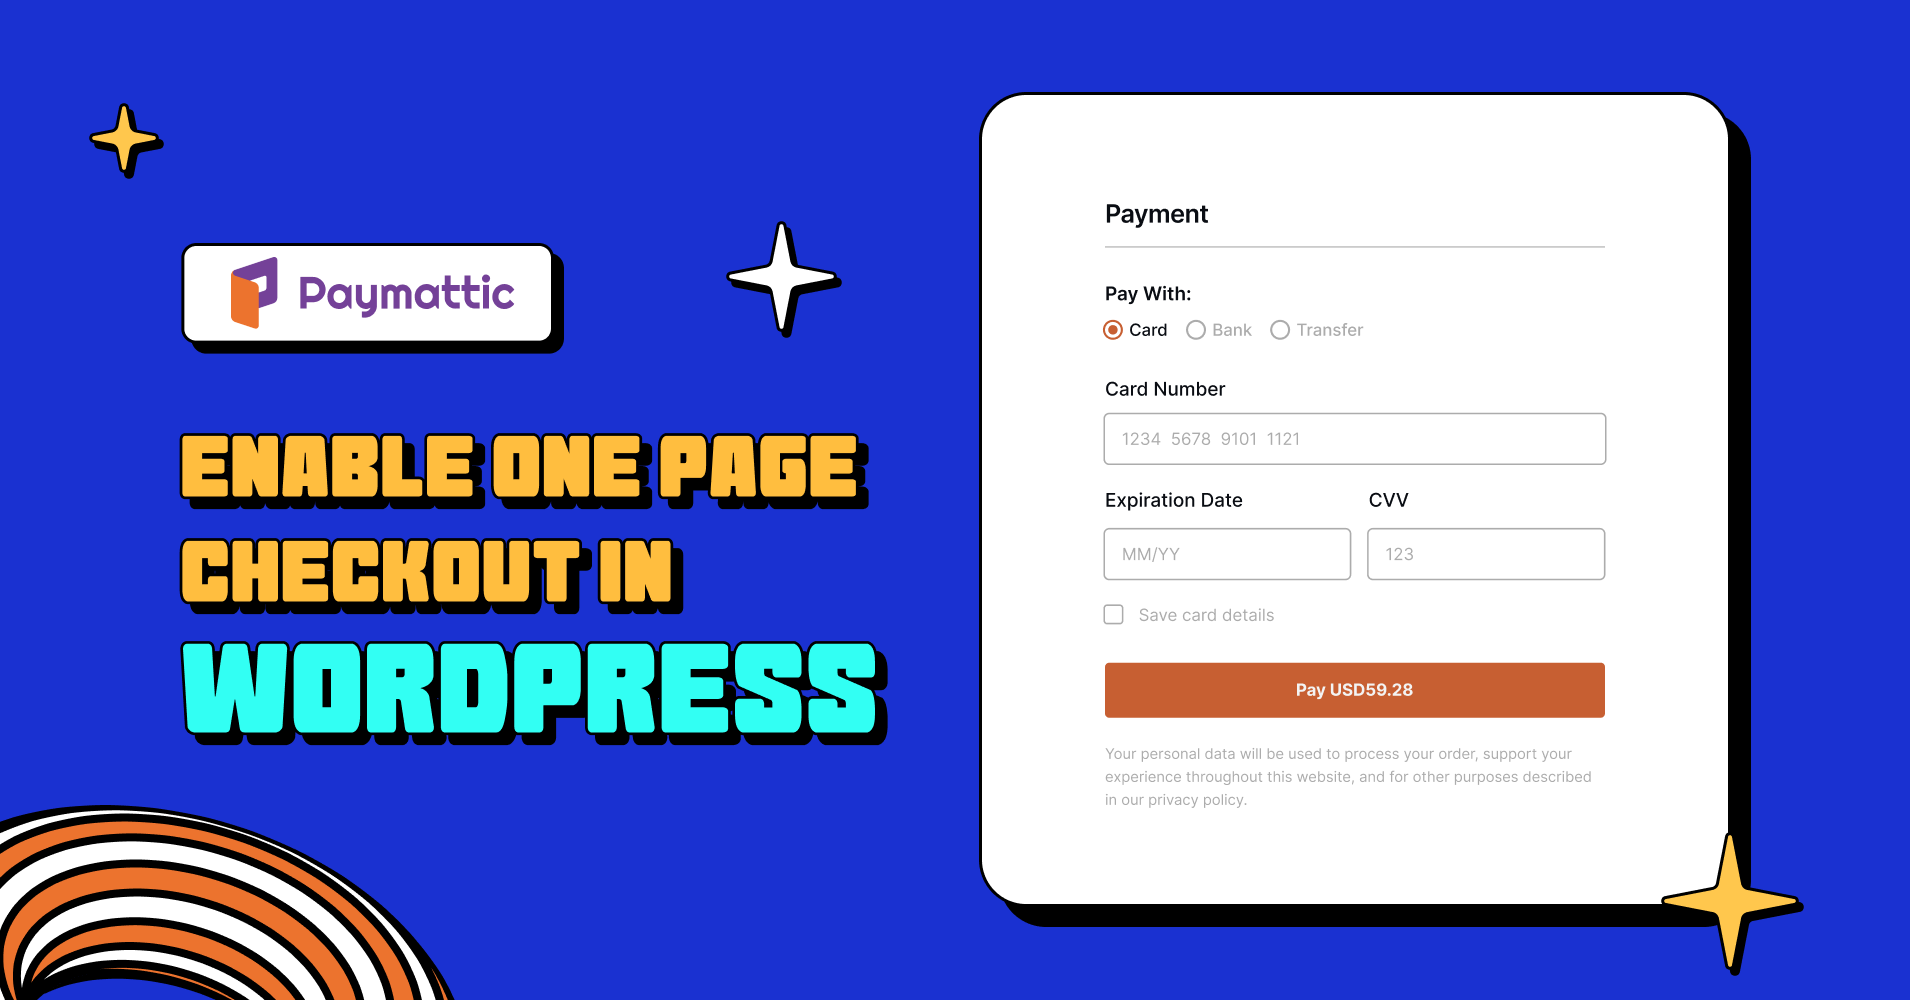 How to Enable One-Page Checkout in WordPress?